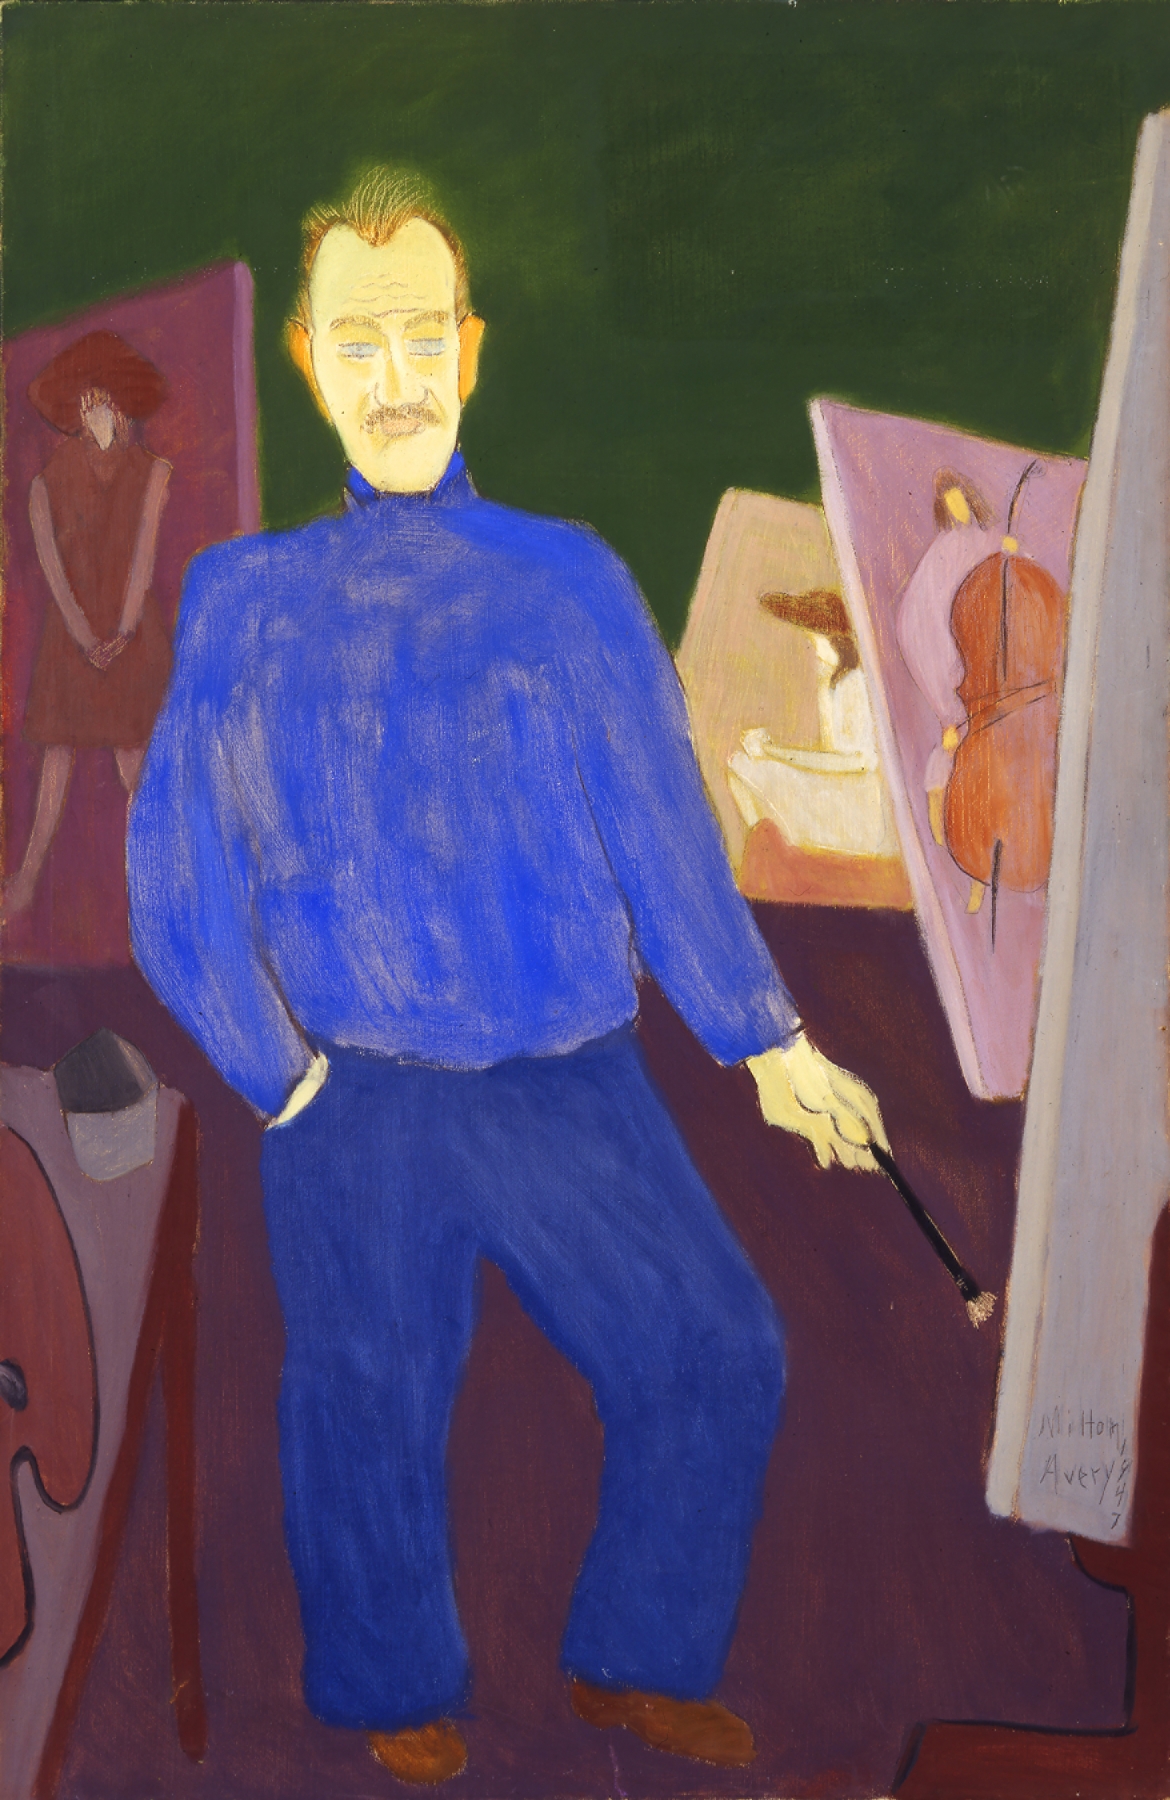 Self-Portrait

1947

Oil on canvas

55 x 36 inches

139.7 x 91.4cm